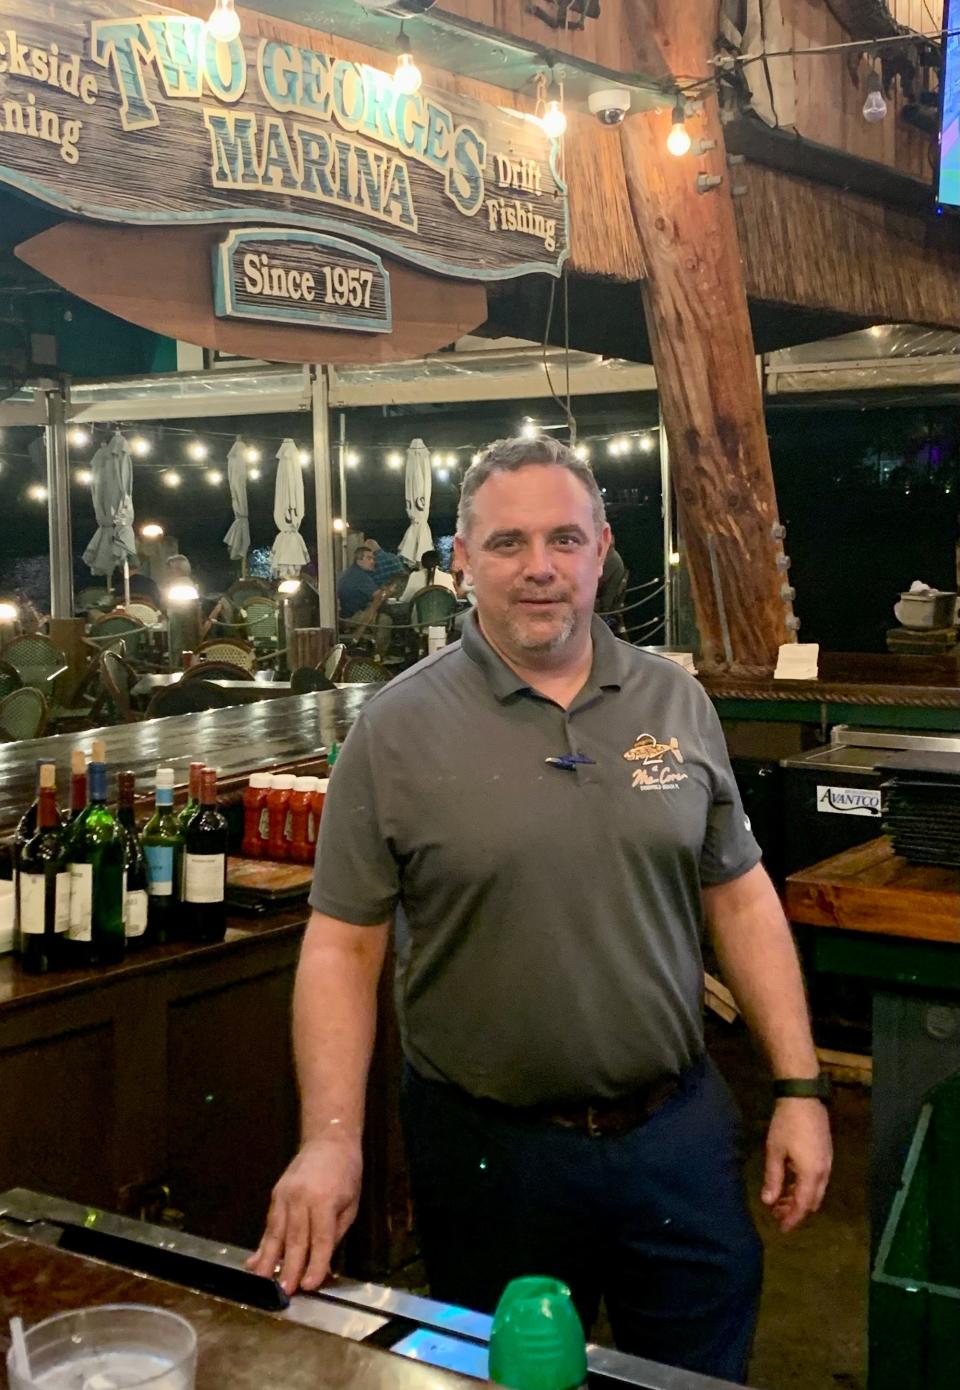 Two Georges manager Kevin Kudlinski said about 15-20 workers arrived early Wednesday morning to prepare the restaurant, which dealt with massive flooding from Hurricane Nicole. 'It was a team effort,' he said.